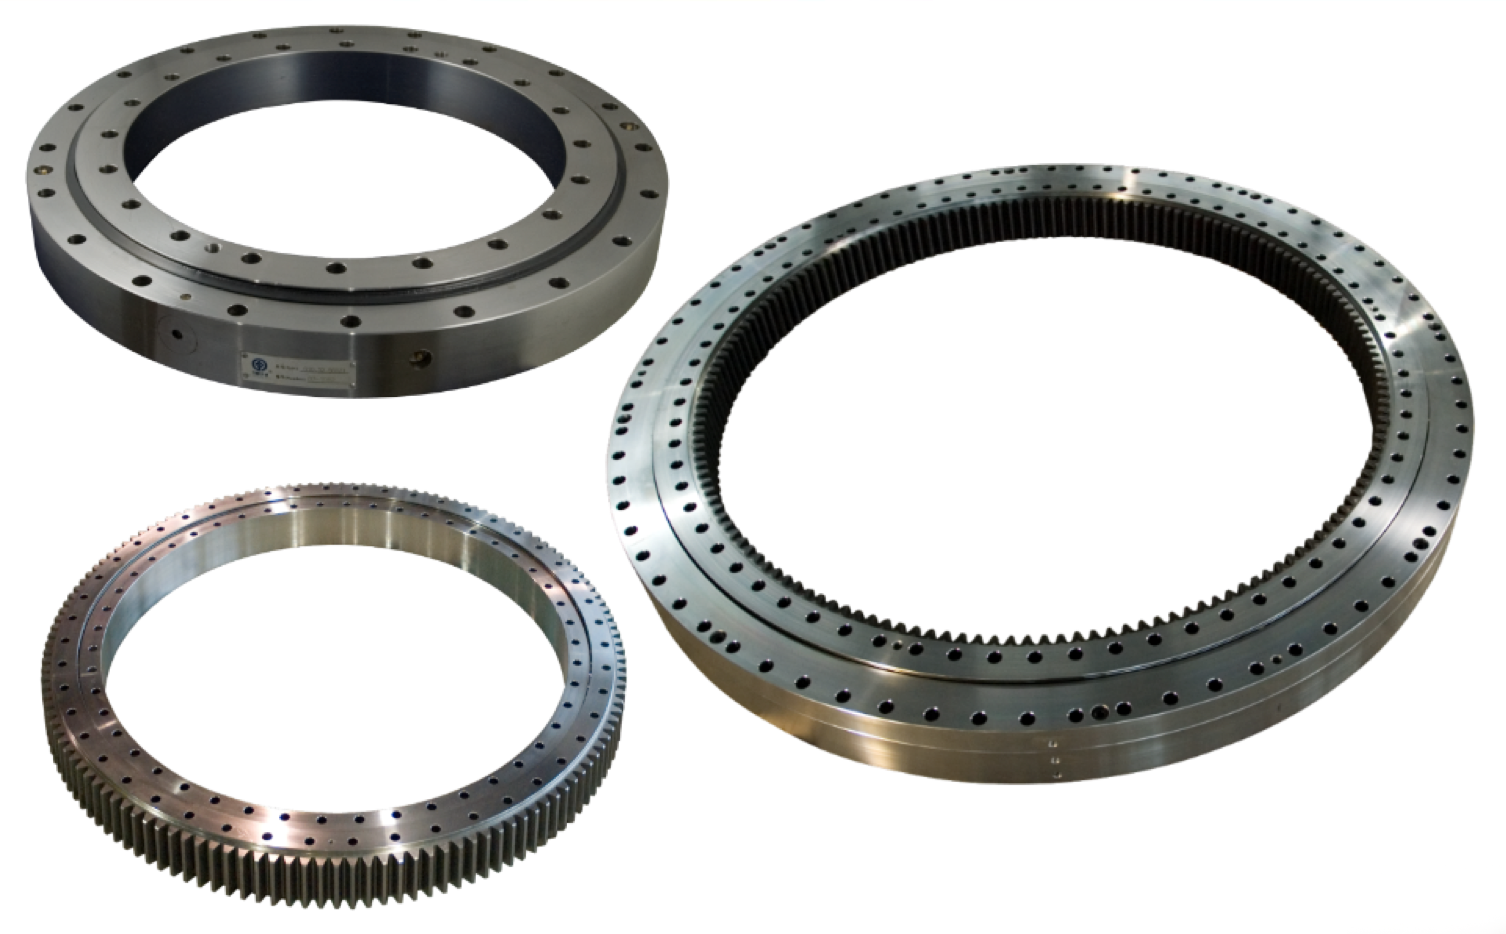 Unimacts manufactures quality mechanical parts for the construction industry